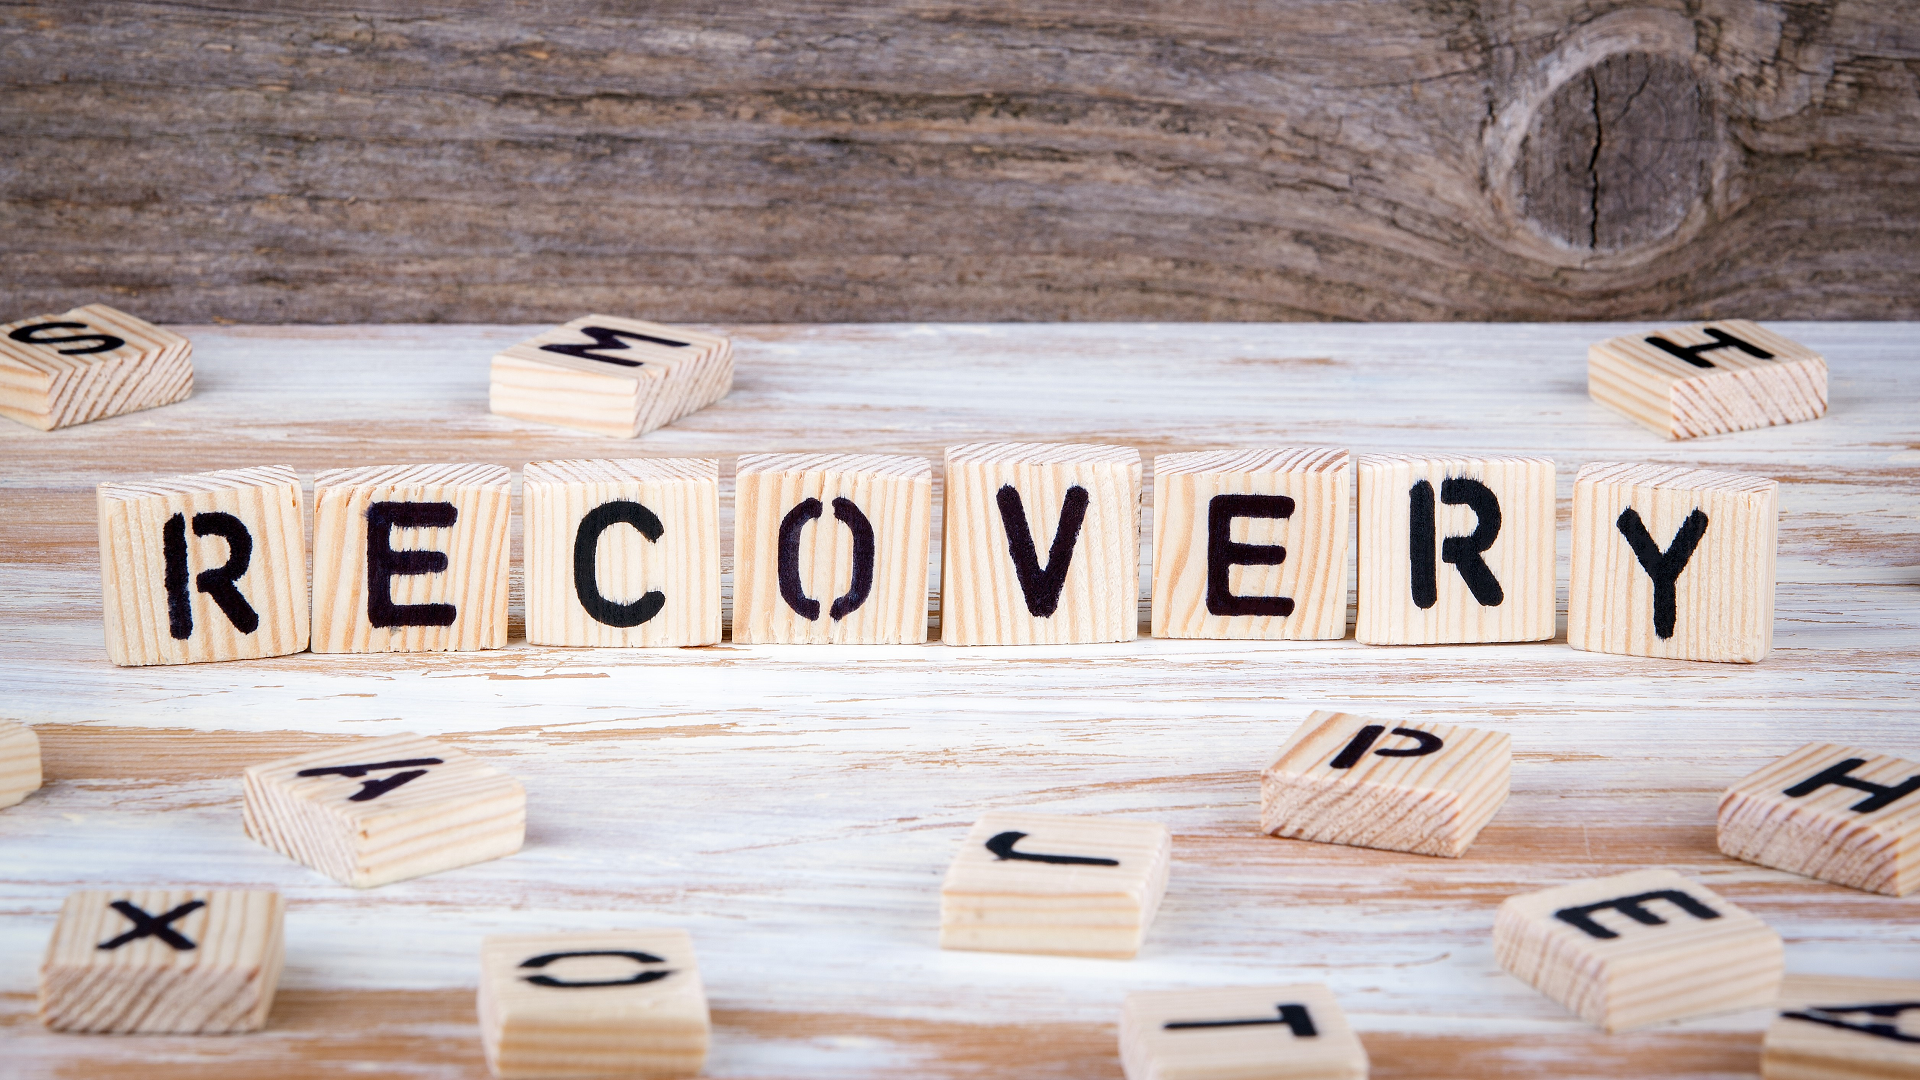 Treating co-occurring disorders can lead to a more successful recovery. Sponsored by Hotel California by the Sea Bellevue.